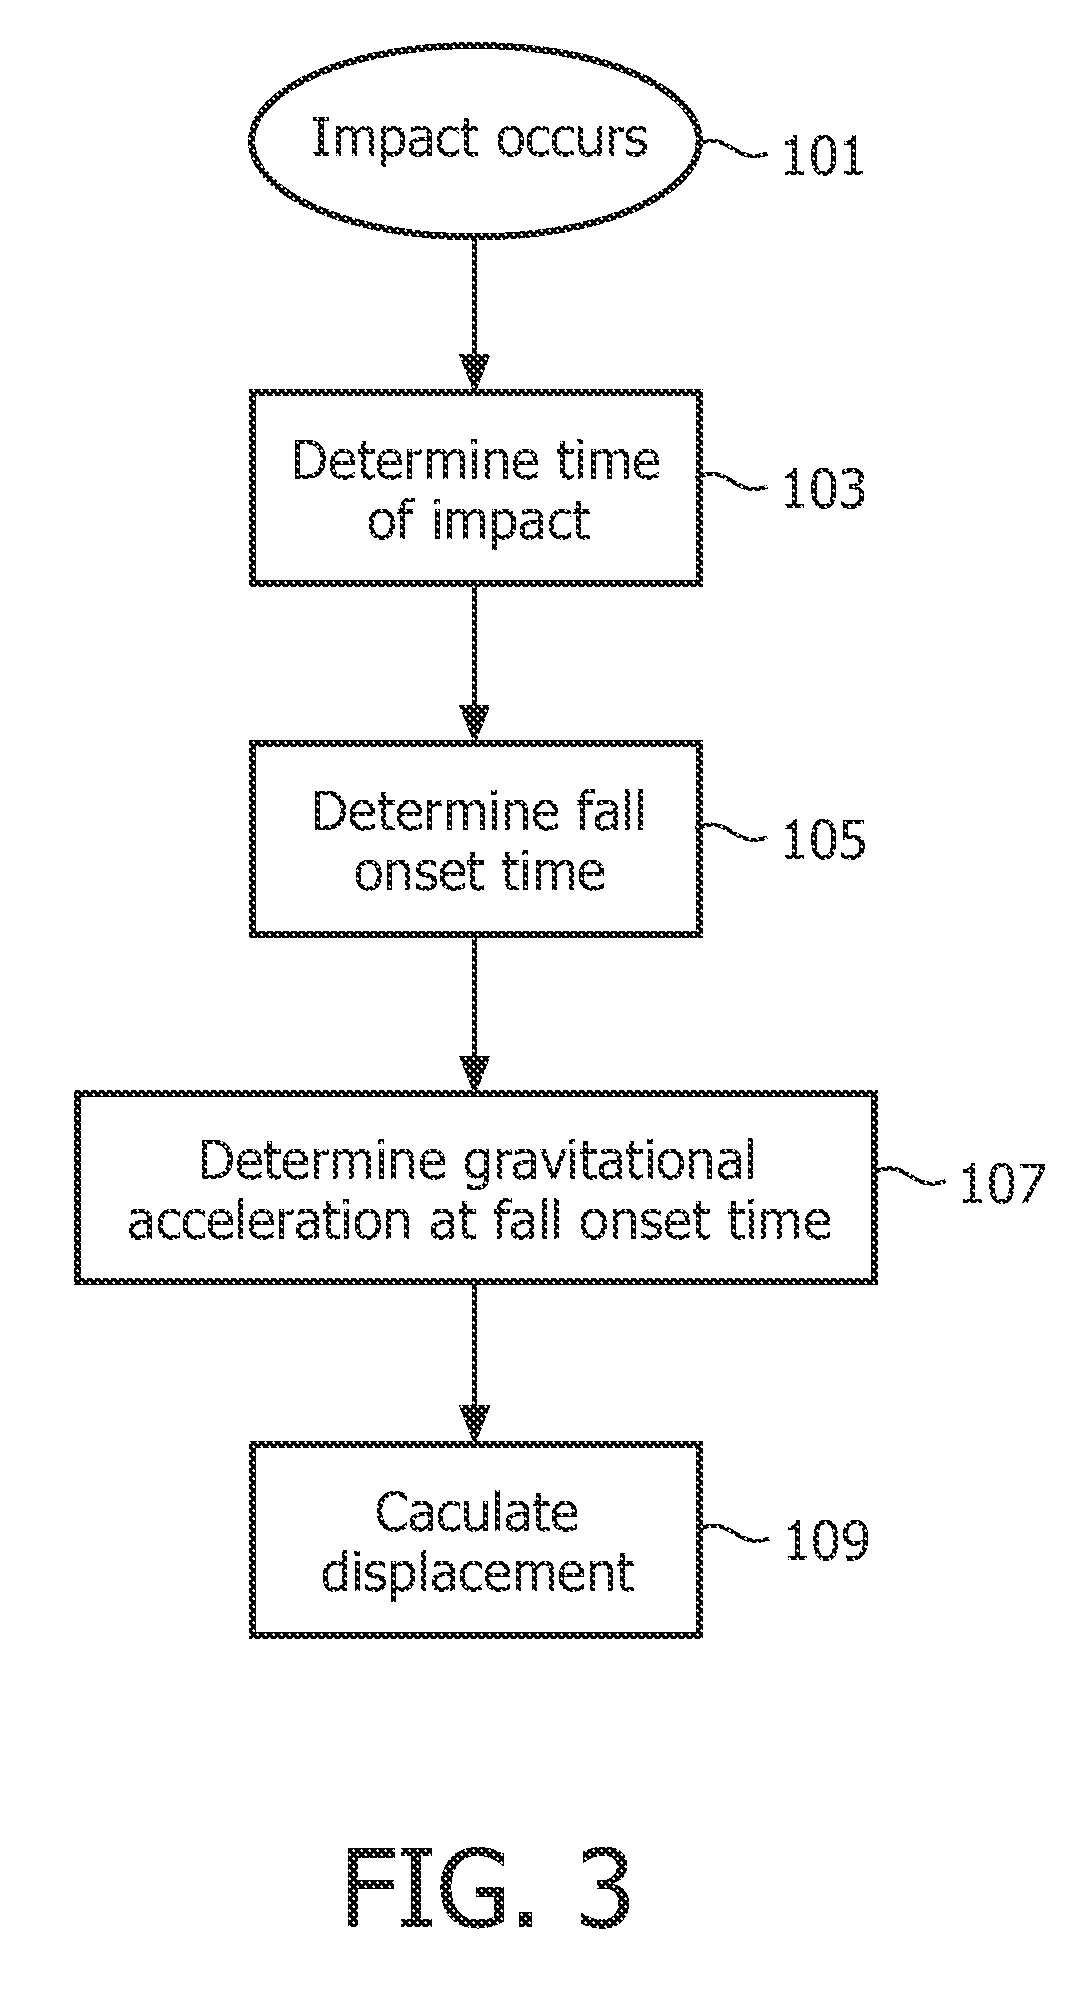 Displacement measurement in a fall detection system